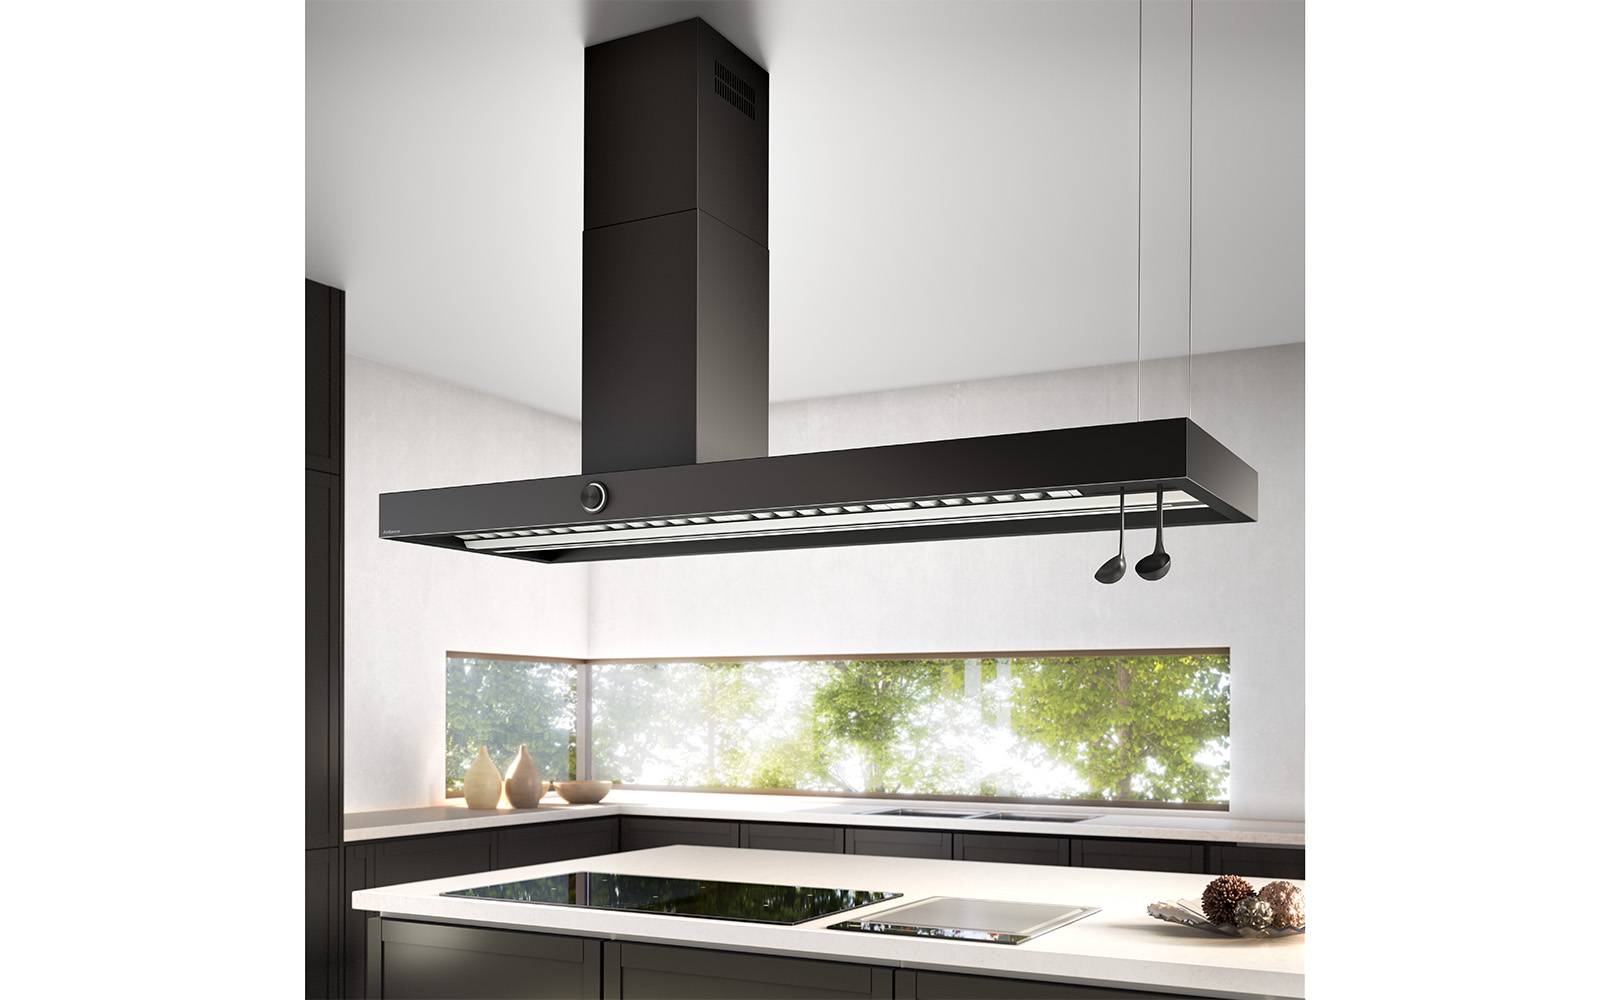 Airforce VIS BOXY Island Cooker Hood 180cm Extraction on Right Hand Side-Antracite finish